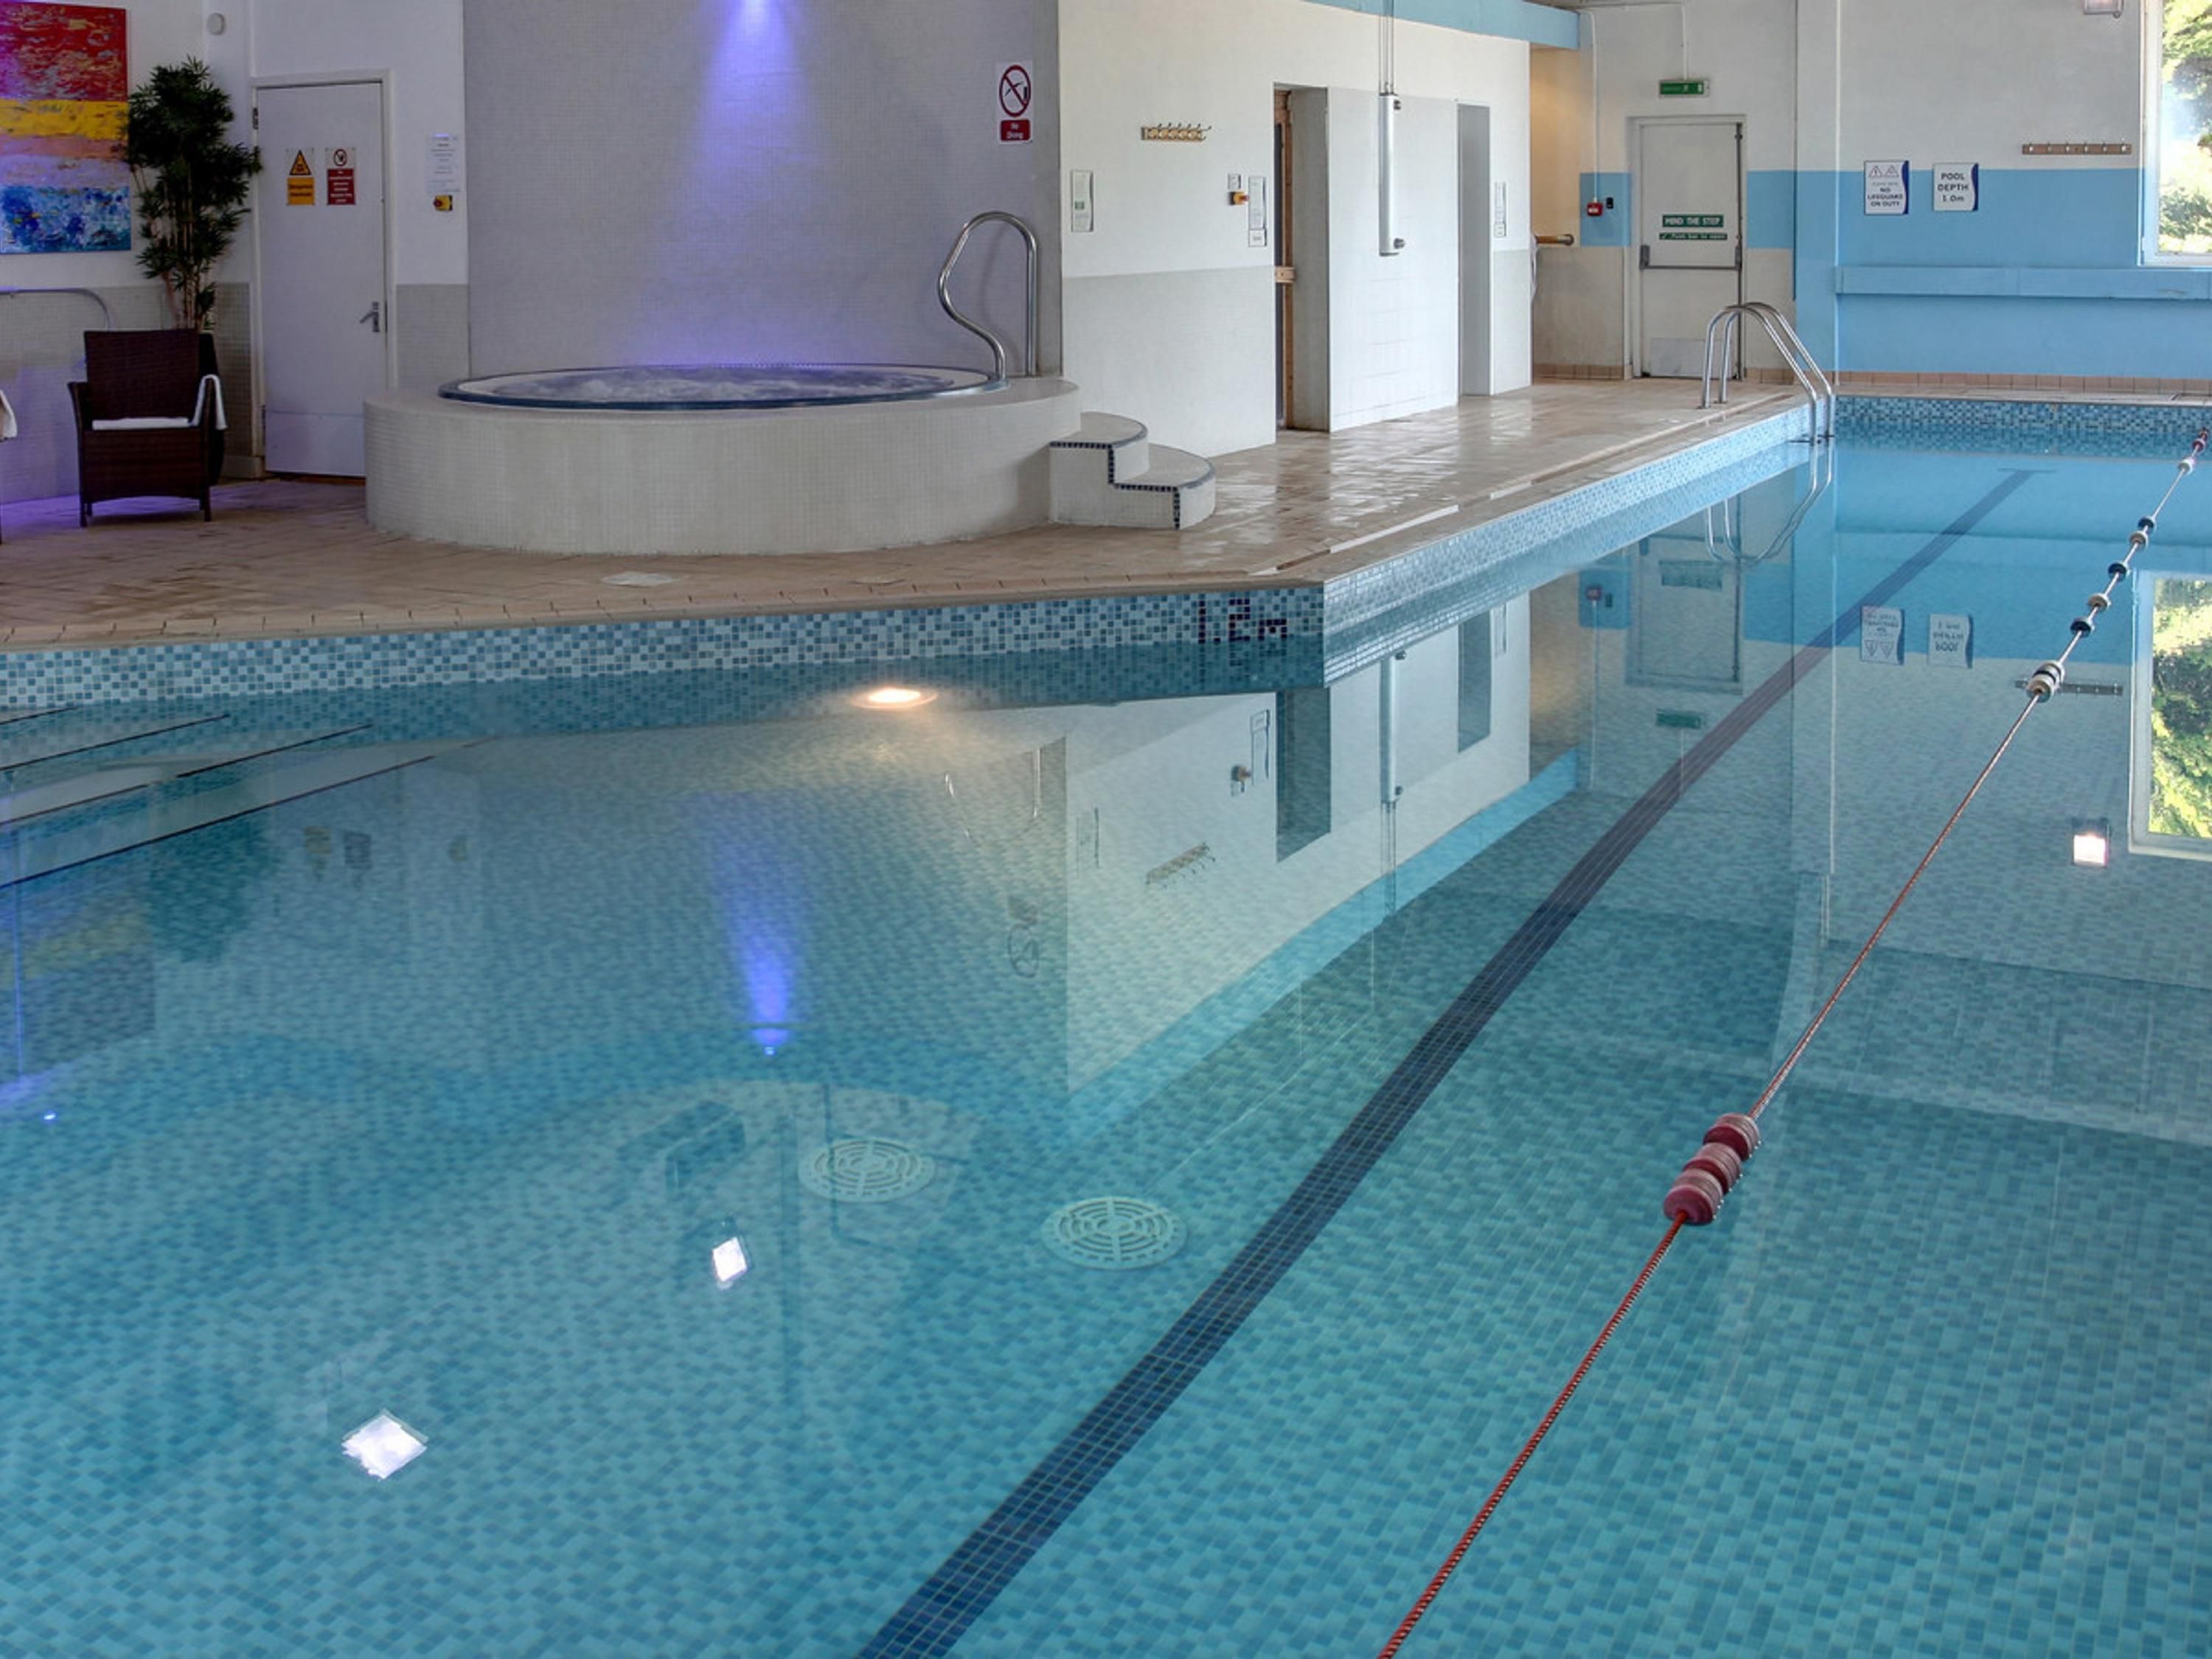 When you stay at the Holiday Inn Aylesbury, you can enjoy the very best in gym and spa facilities, equipment and training. Hotel guests, members and visitors can benefit from access to our gym and pool facilities, with great rates for gym memberships and personal training packages. 